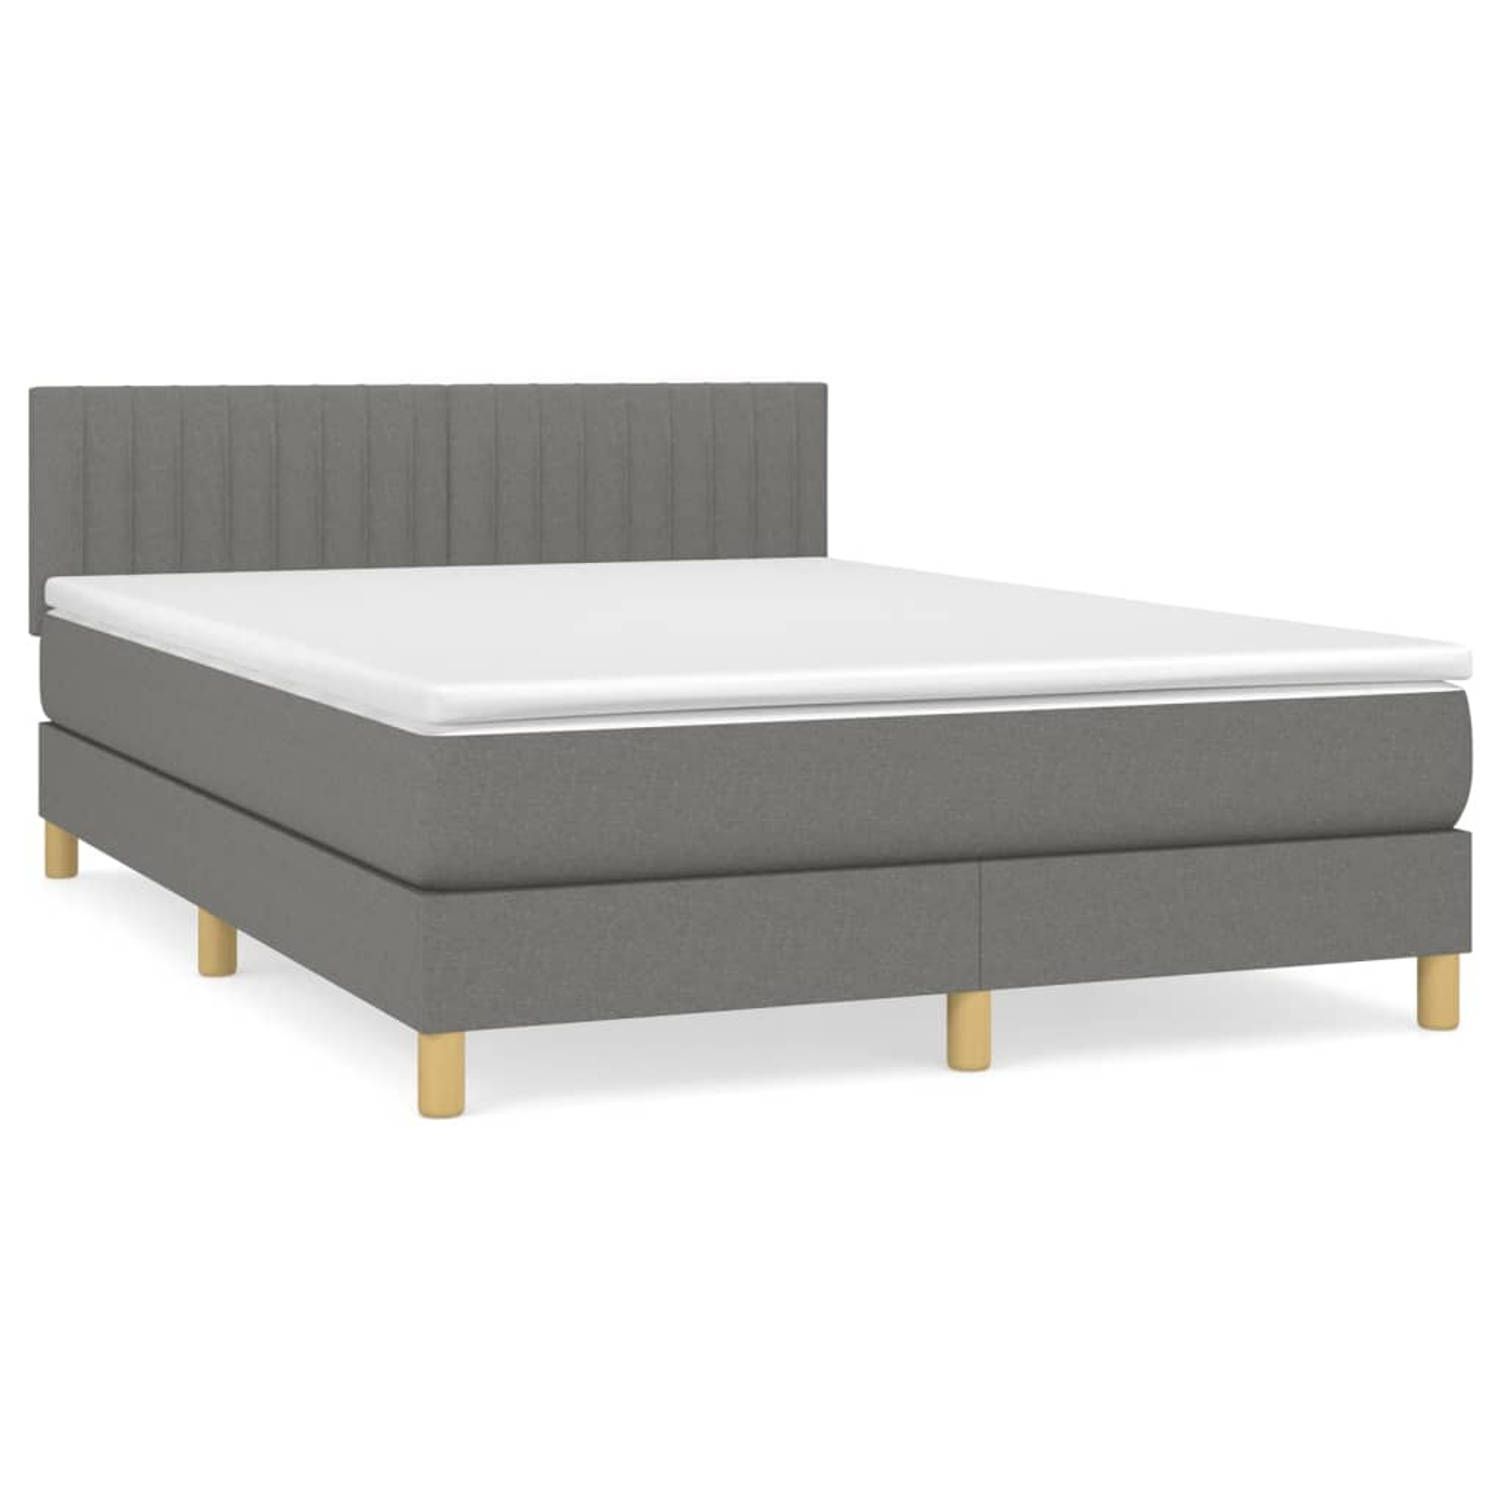 The Living Store Bed - Rustgevende Nachtrust - Boxspringbed 193x144x78/88 cm - Duurzaam Materiaal